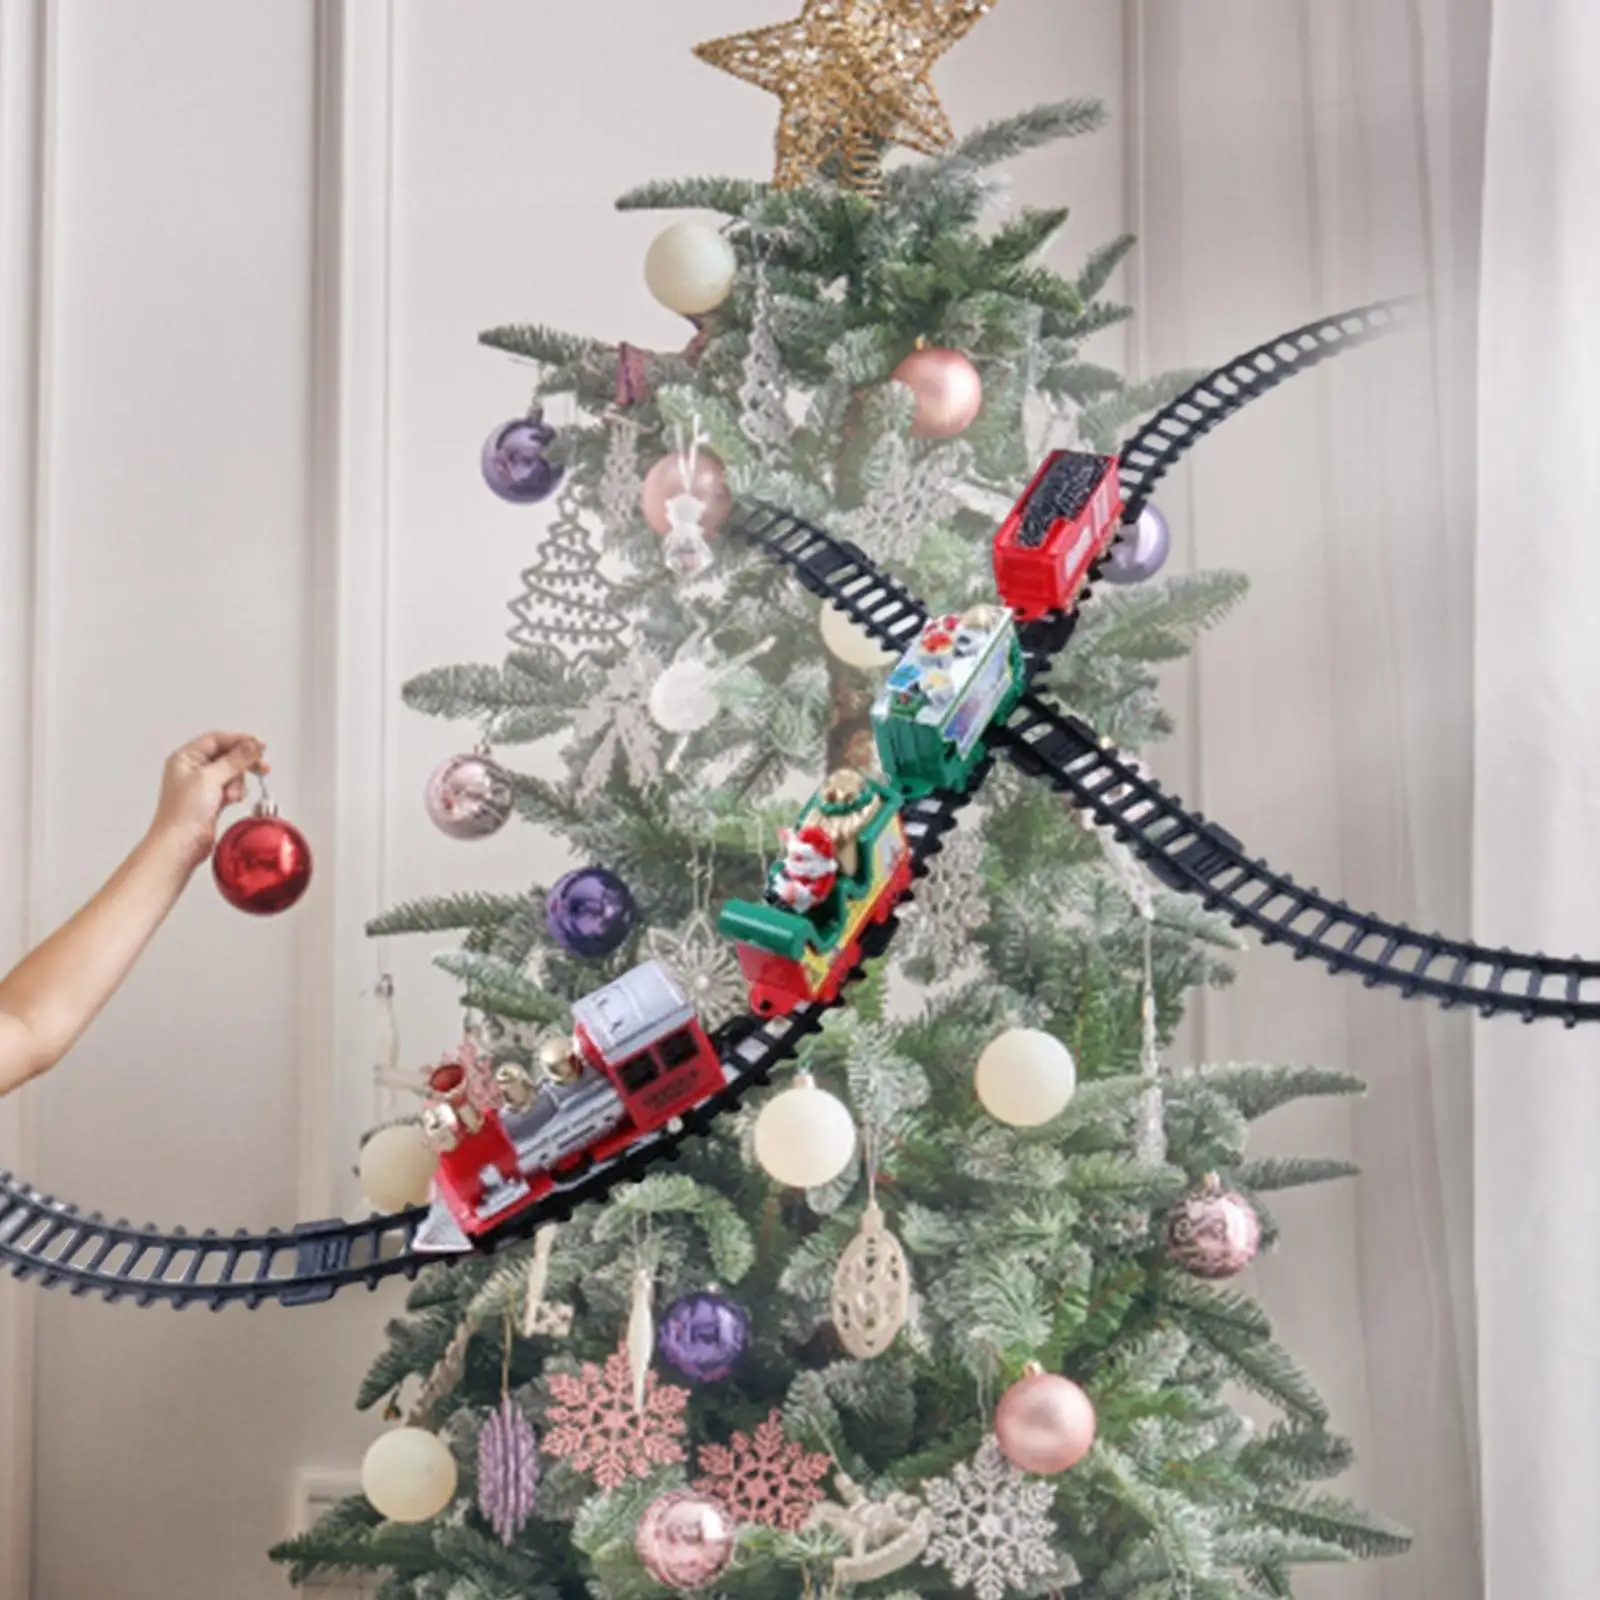 Electric Train set toy,Xmas Tree Decors with Lights and Sounds,Railway Track Set for Toddlers New Year Gifts